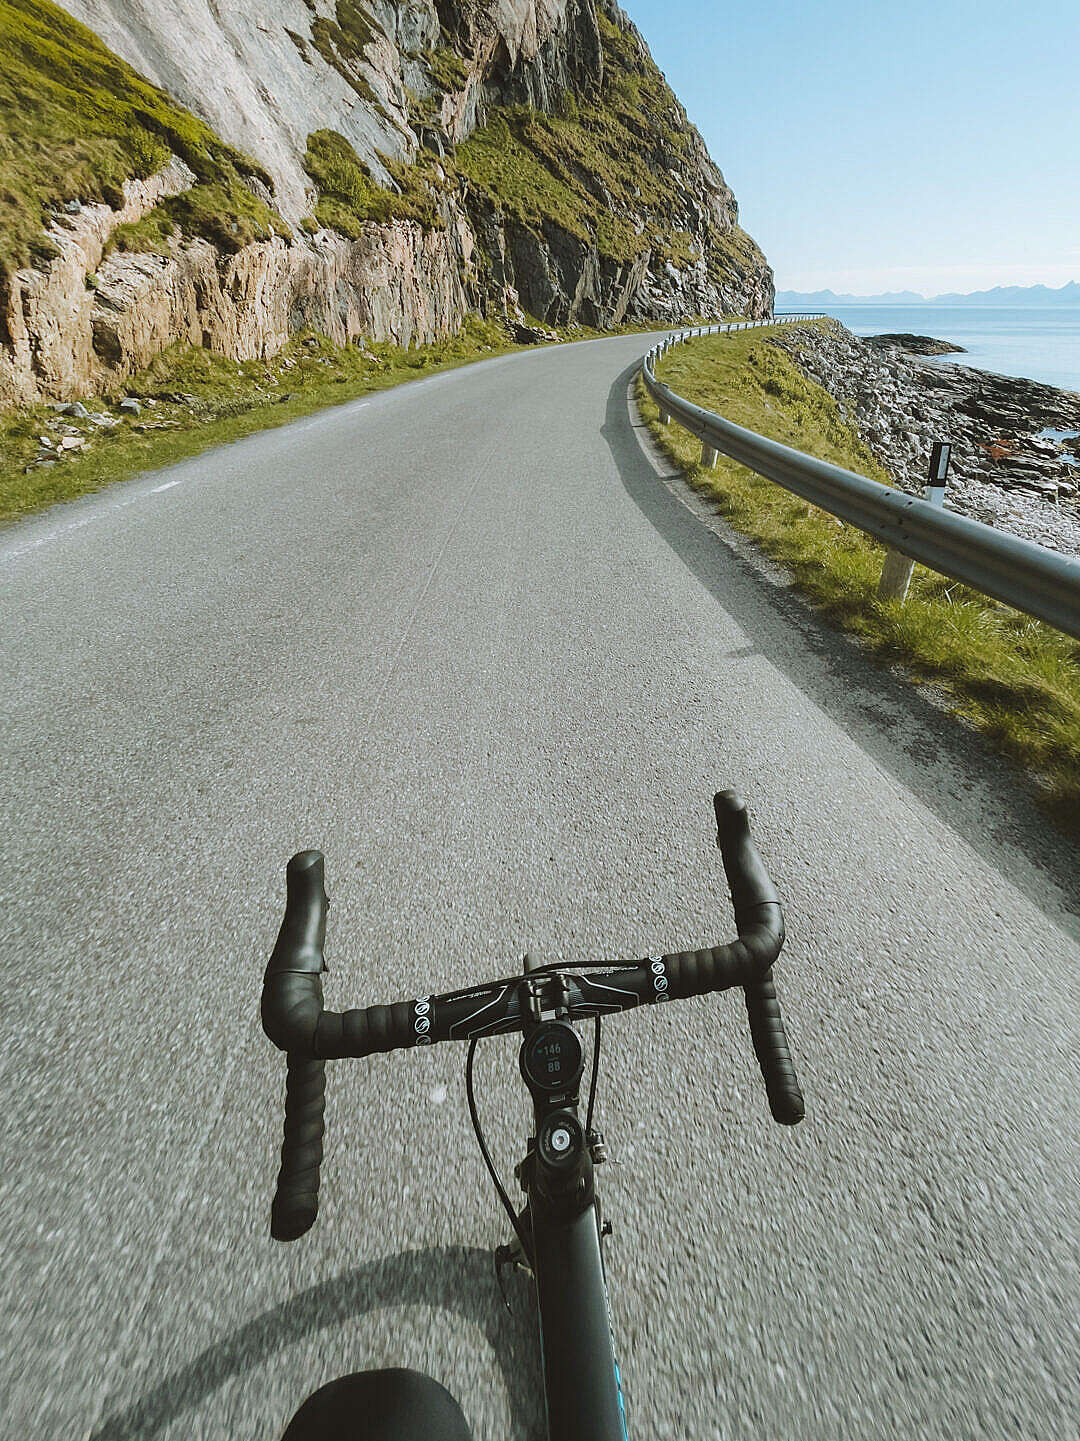 Download Road Cycling on Coastal Road FREE Stock Photo